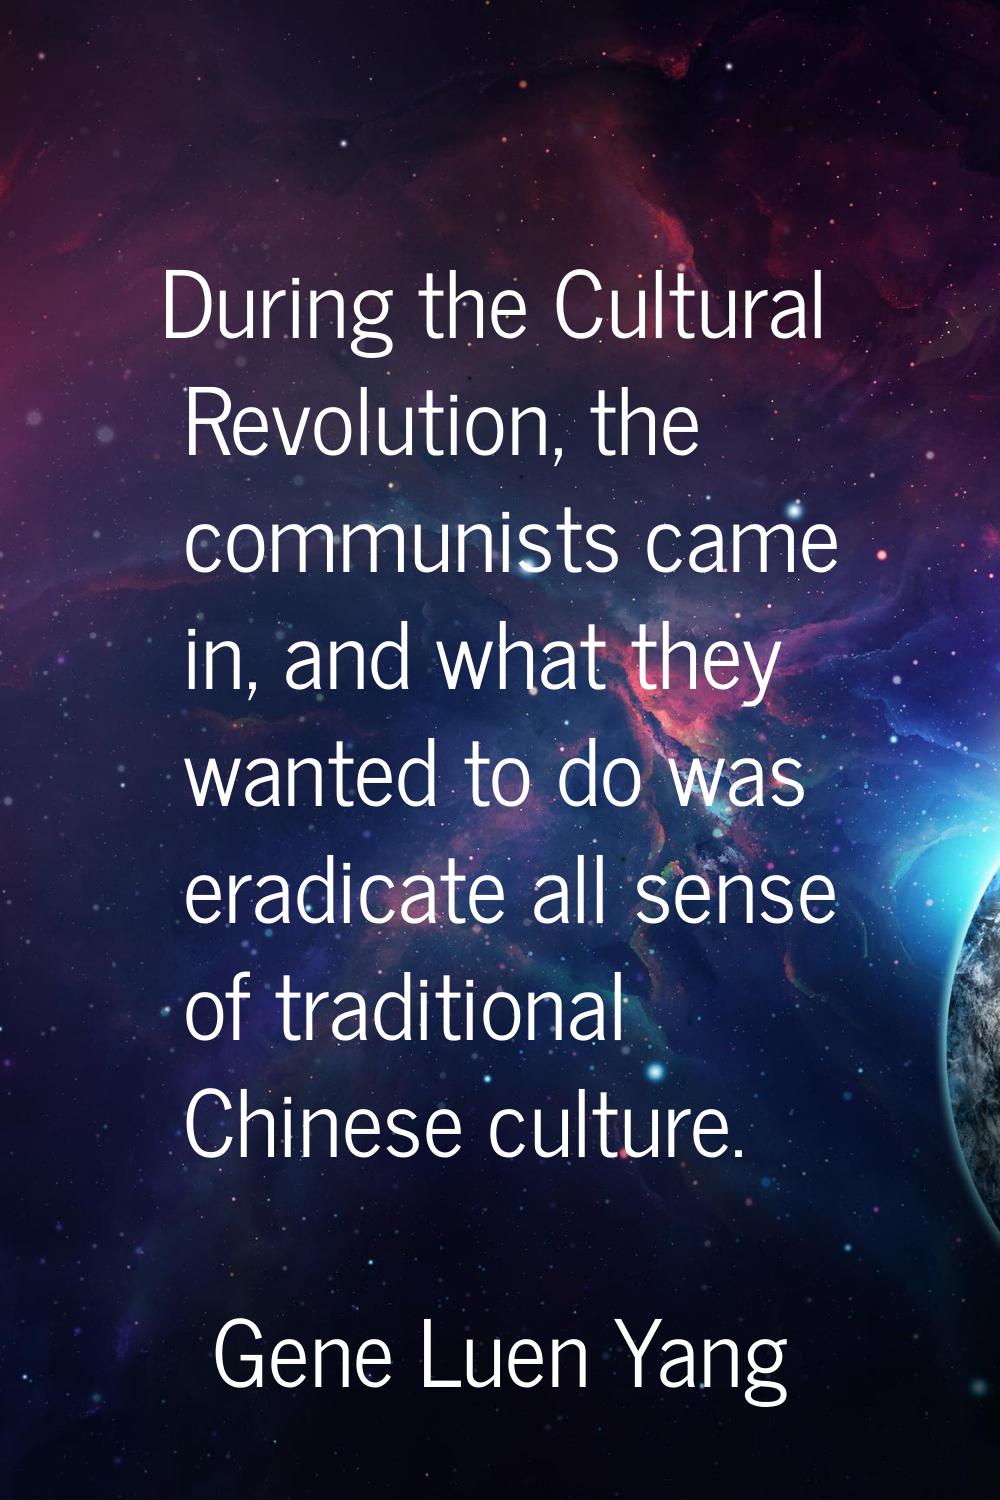 During the Cultural Revolution, the communists came in, and what they wanted to do was eradicate al